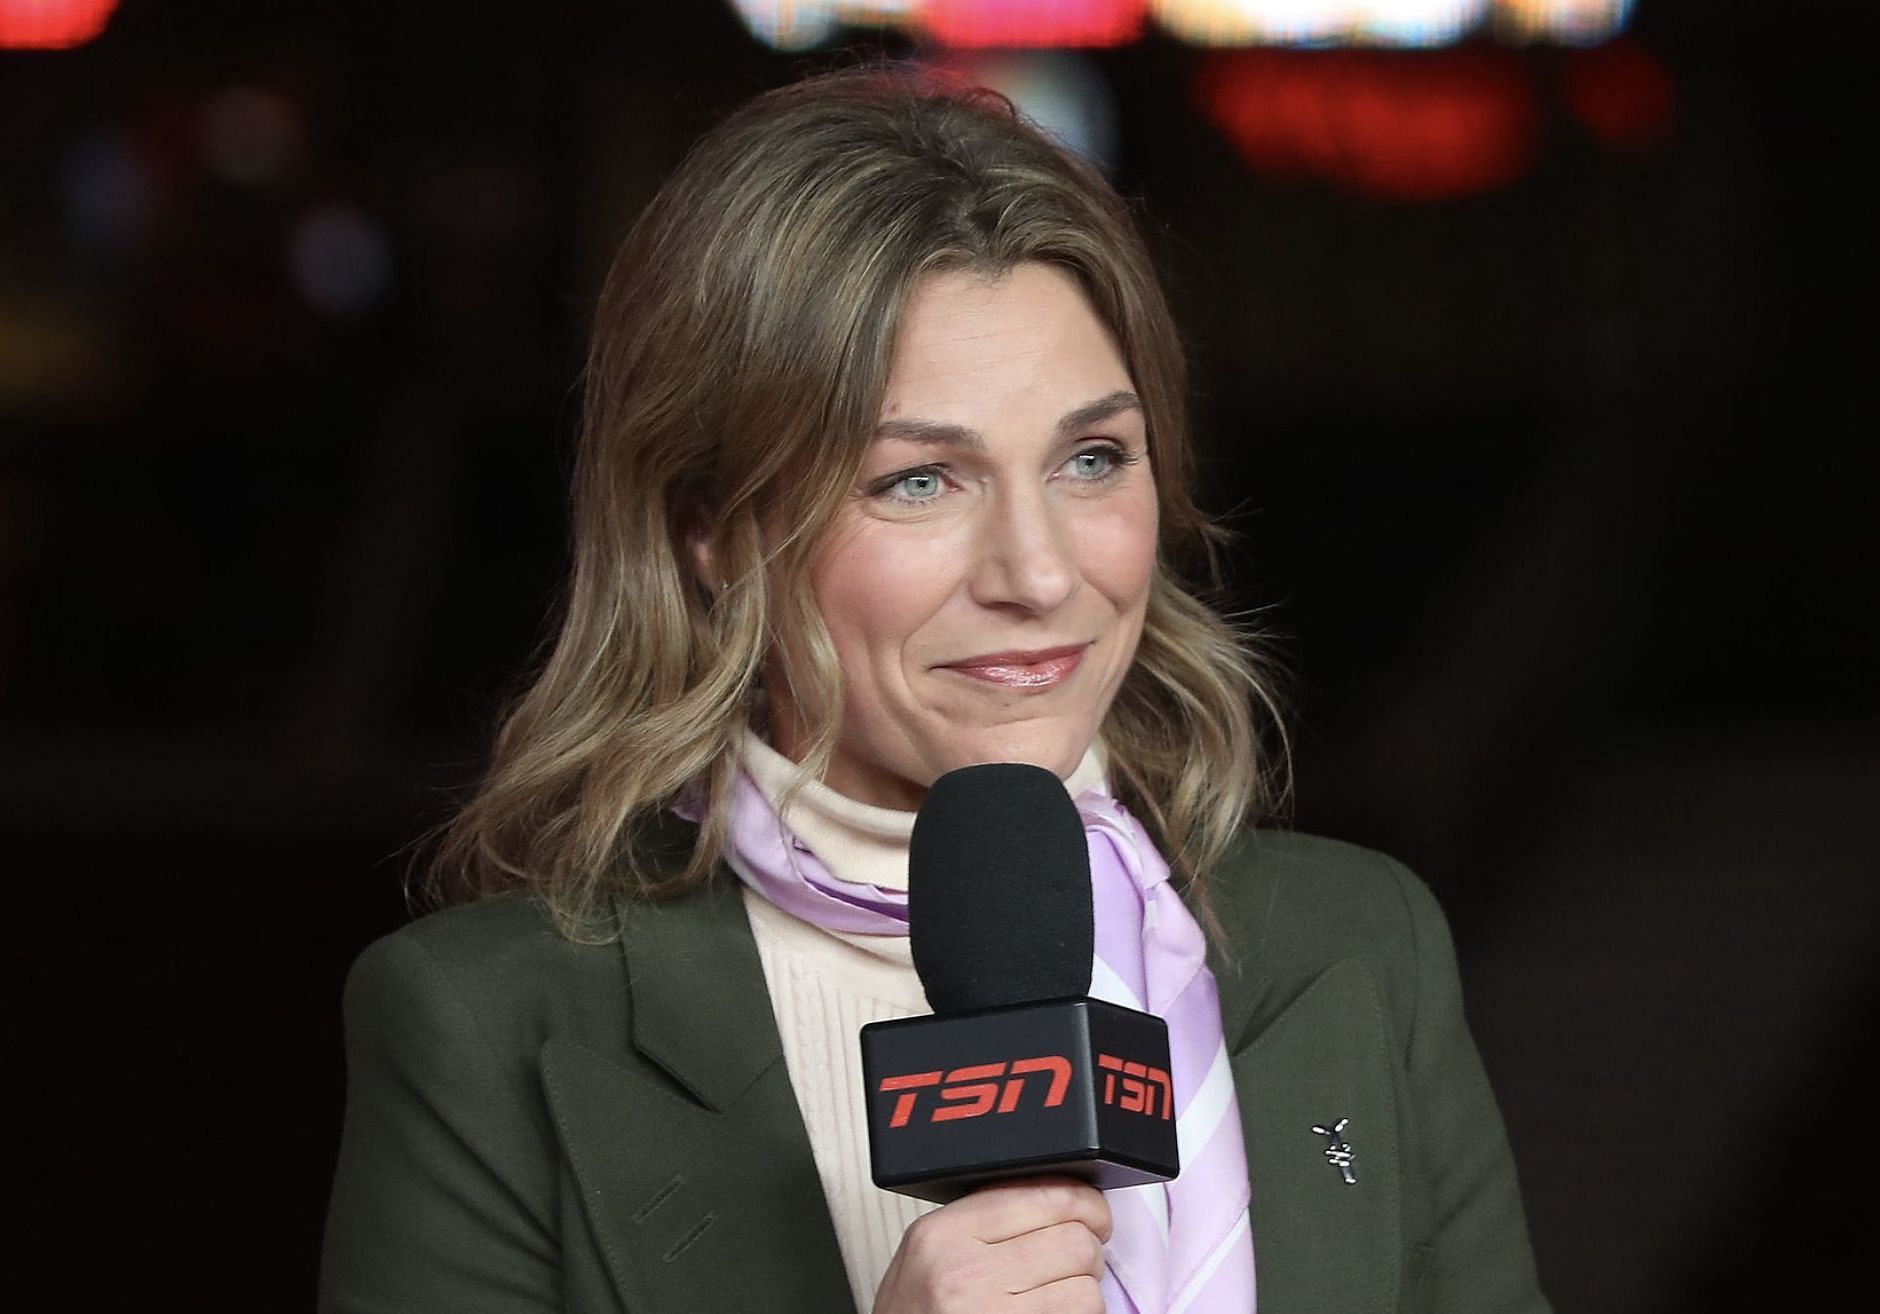 Who is Cheryl Pounder? Meet the Olympic gold medalist who is now NHL 24